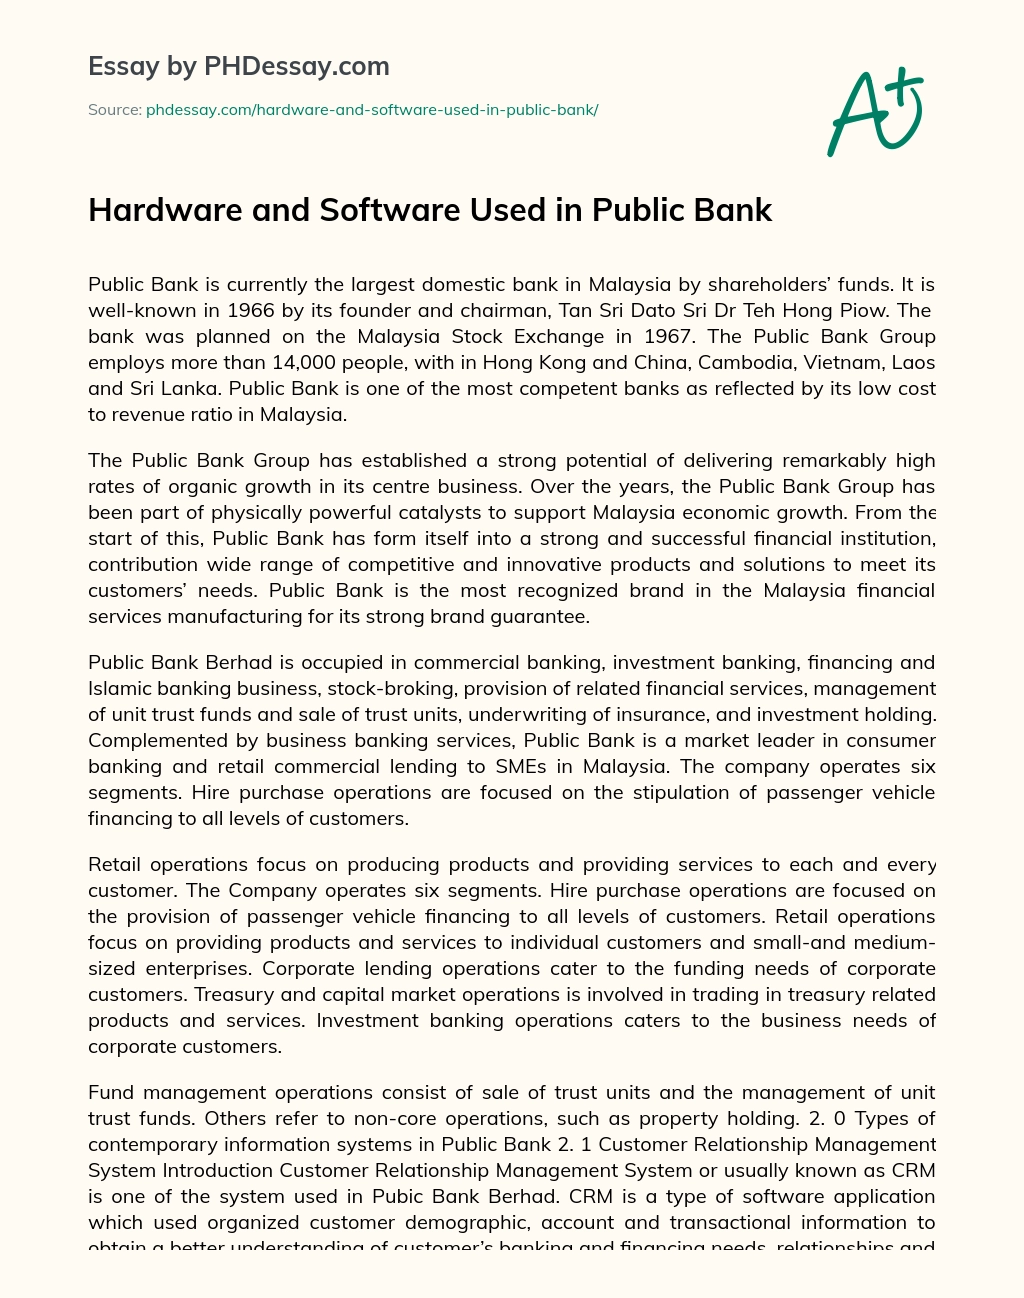 Hardware and Software Used in Public Bank essay